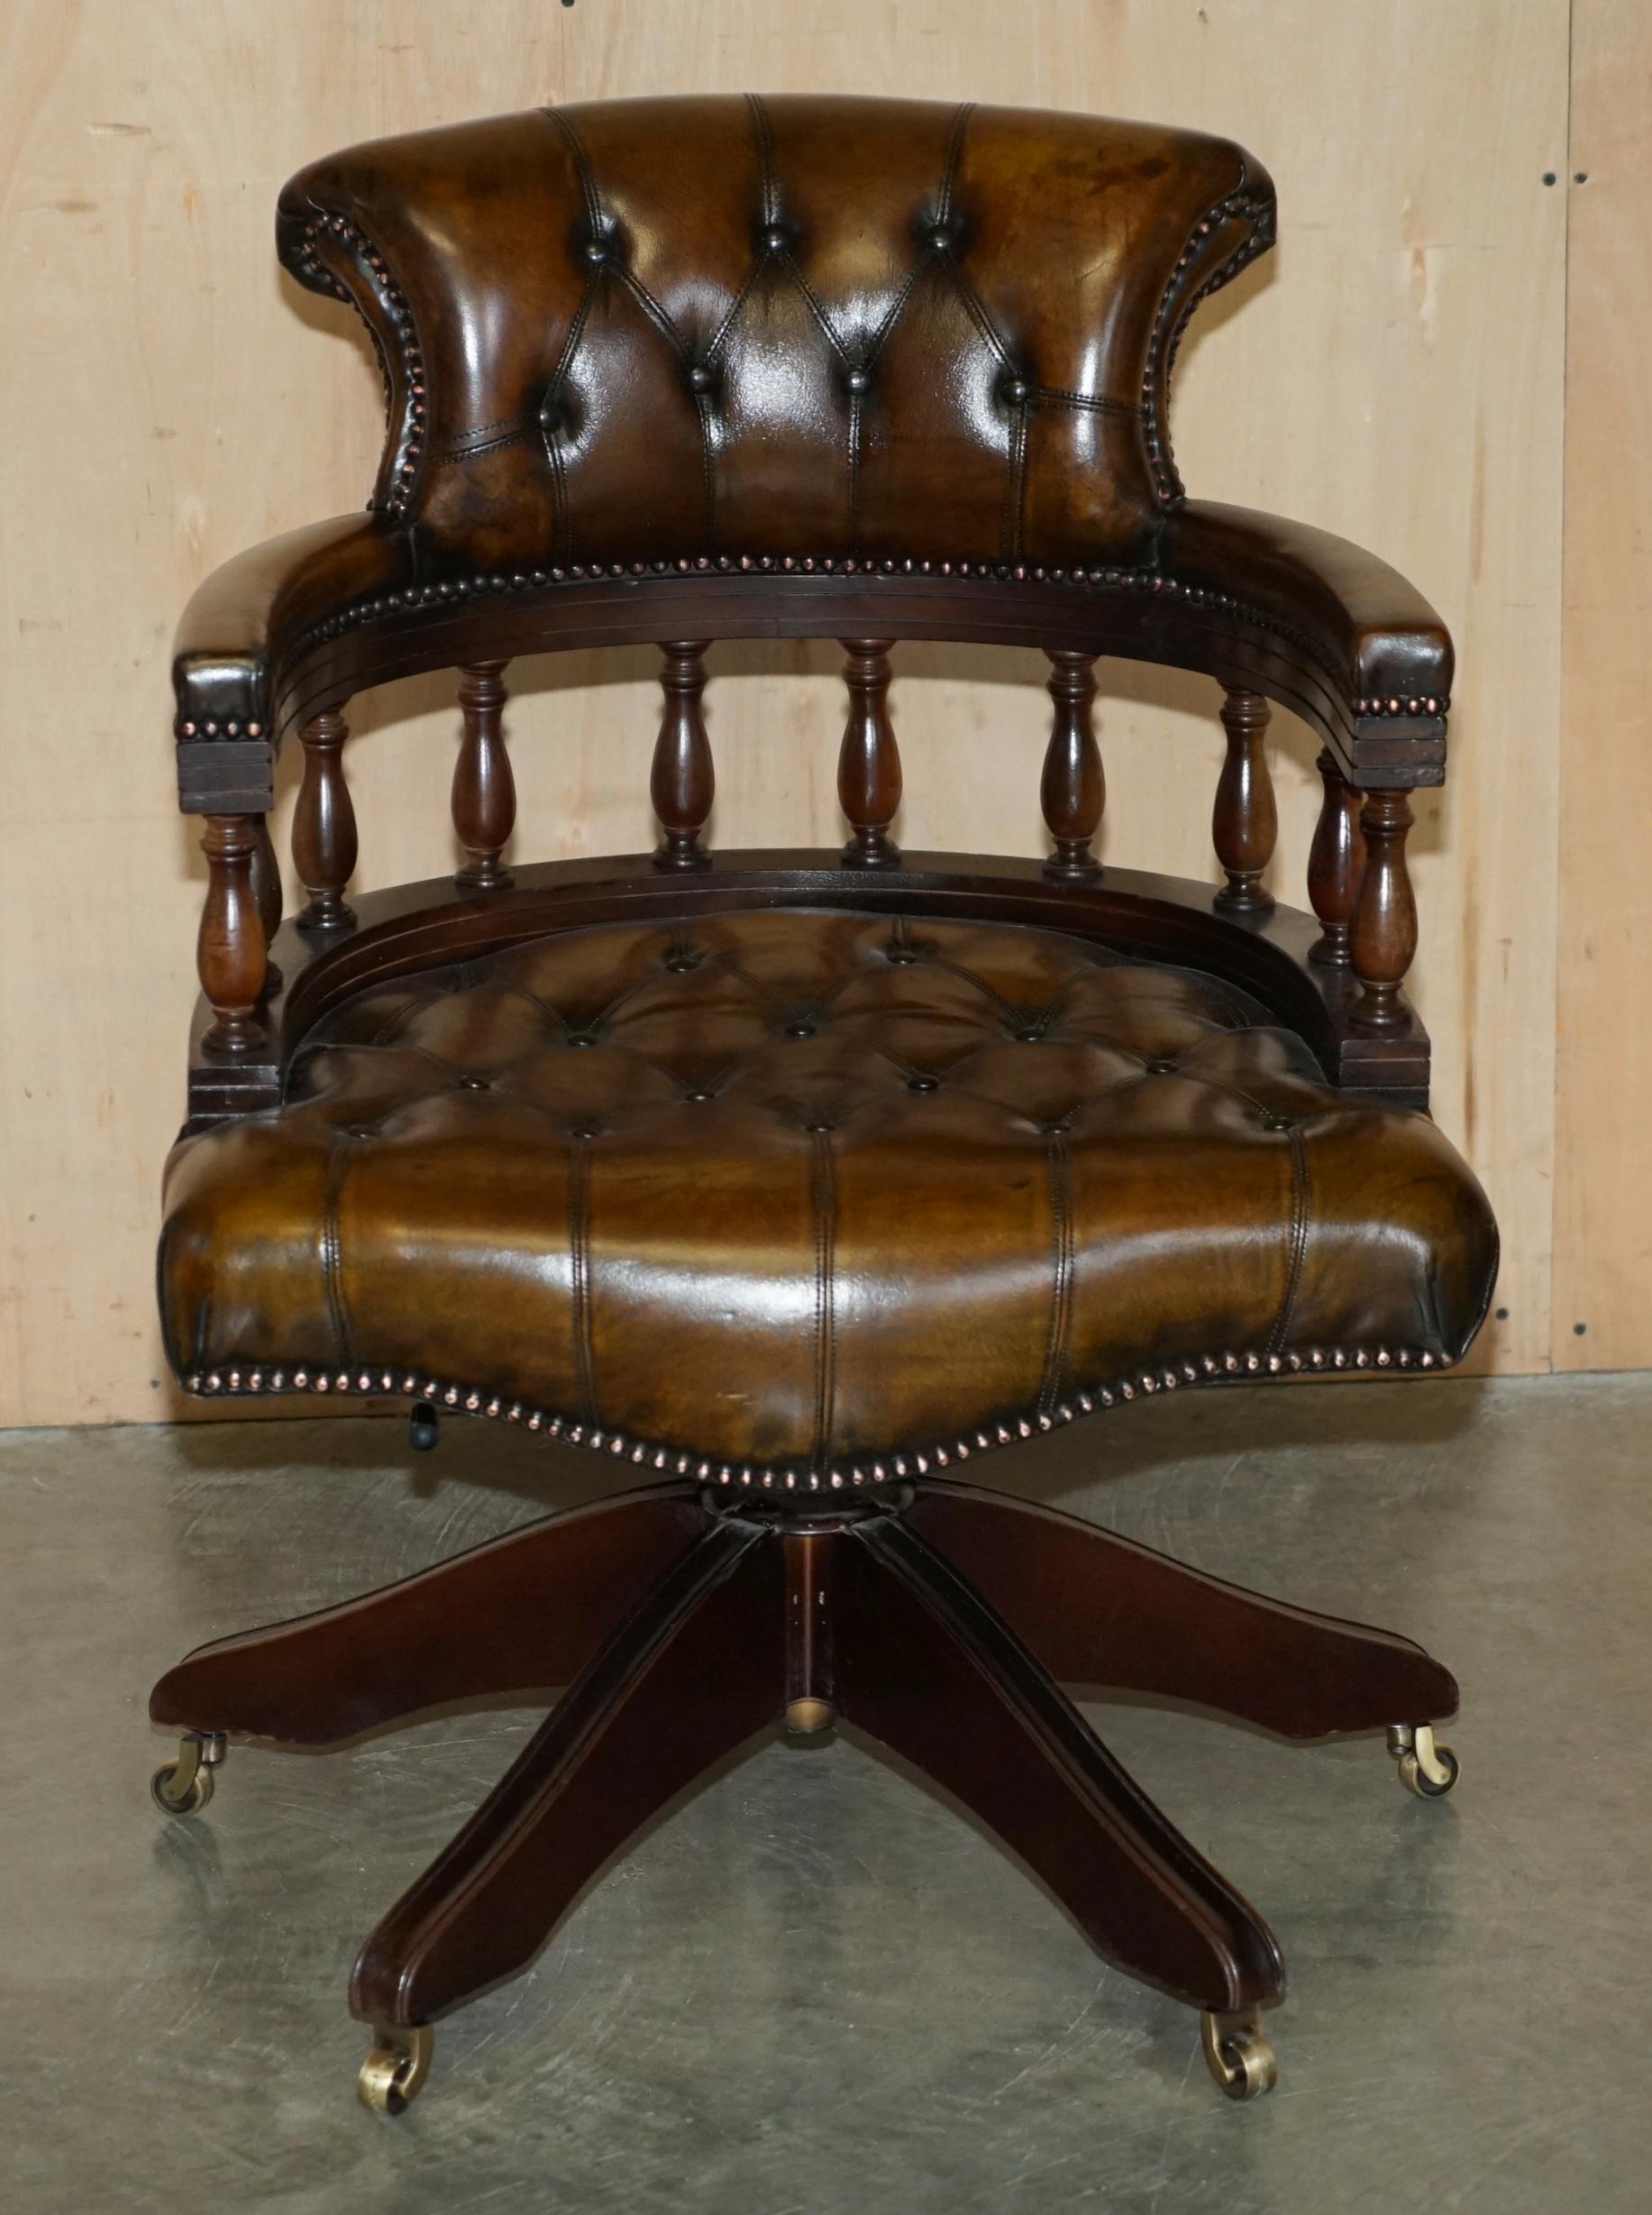 Royal House Antiques

Royal House Antiques is delighted to offer for sale this stunning fully restored vintage Regency style Chesterfield hand dyed brown leather office chair

Please note the delivery fee listed is just a guide, it covers within the